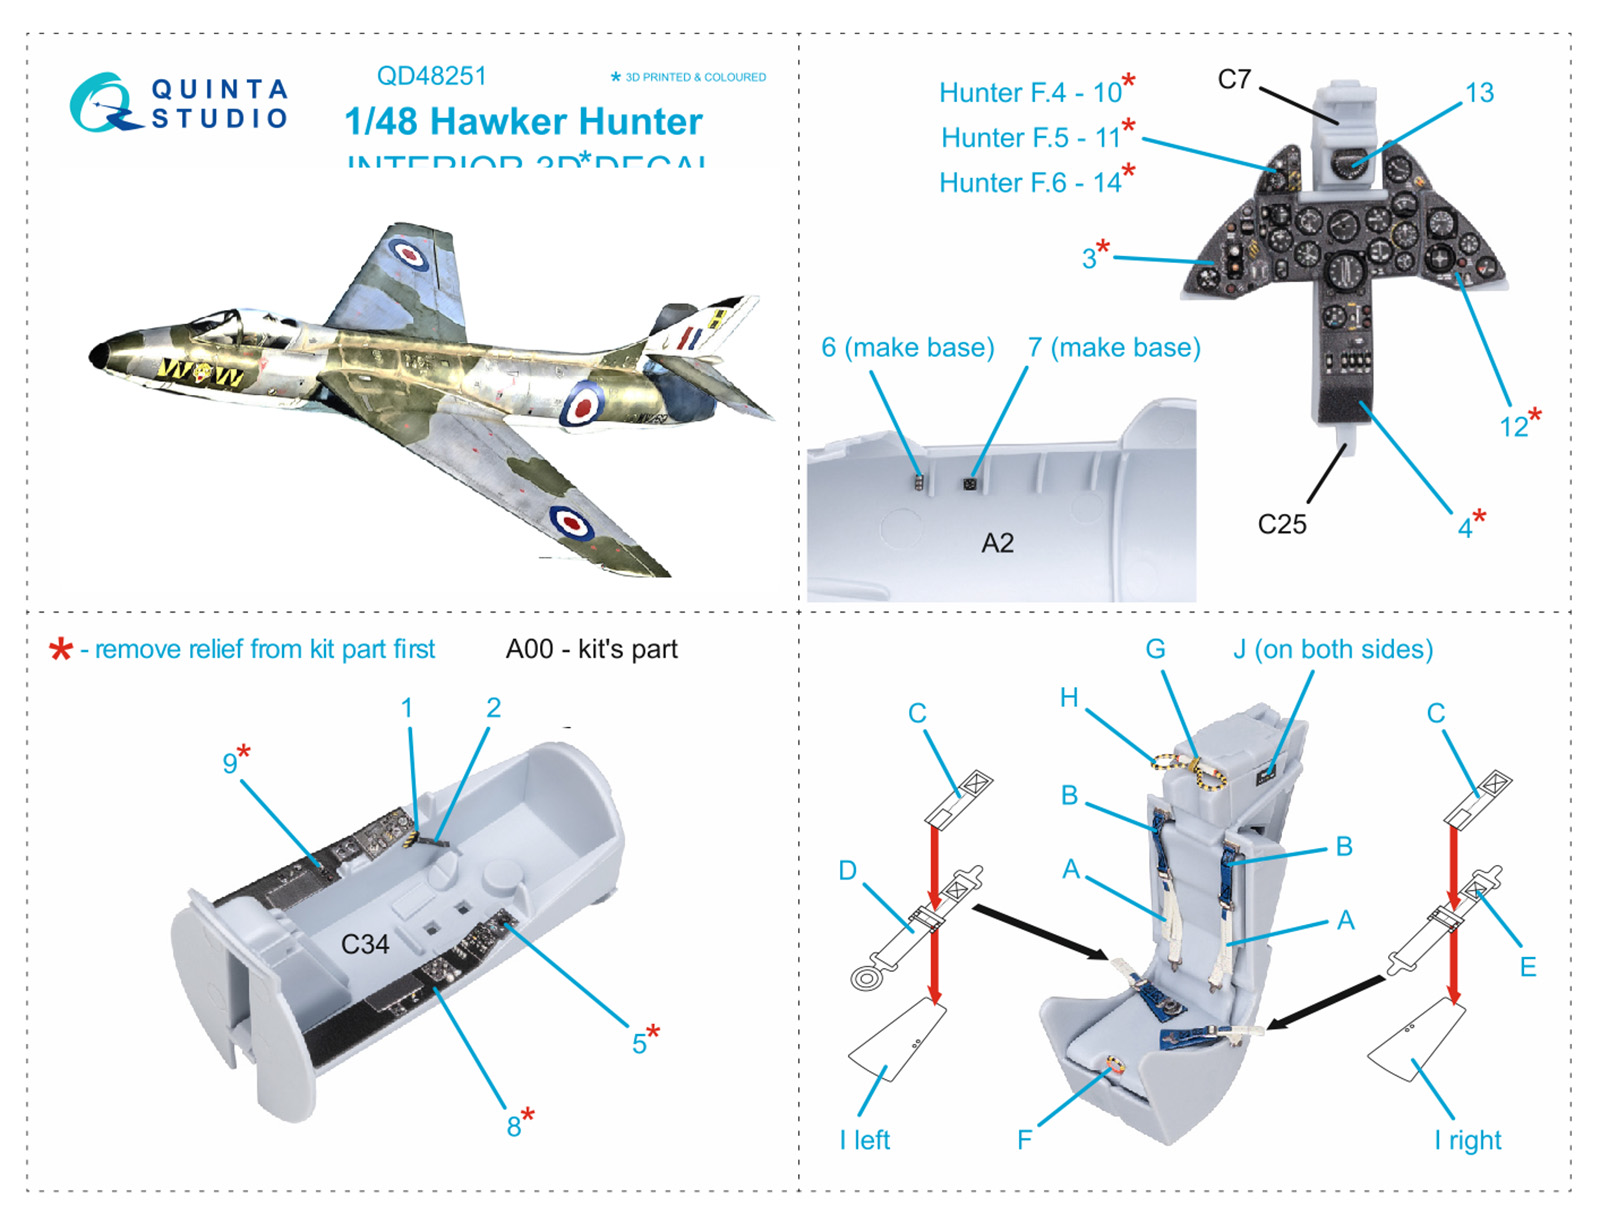 Hawker Hunter 3D-Printed & coloured Interior on decal paper (Airfix)